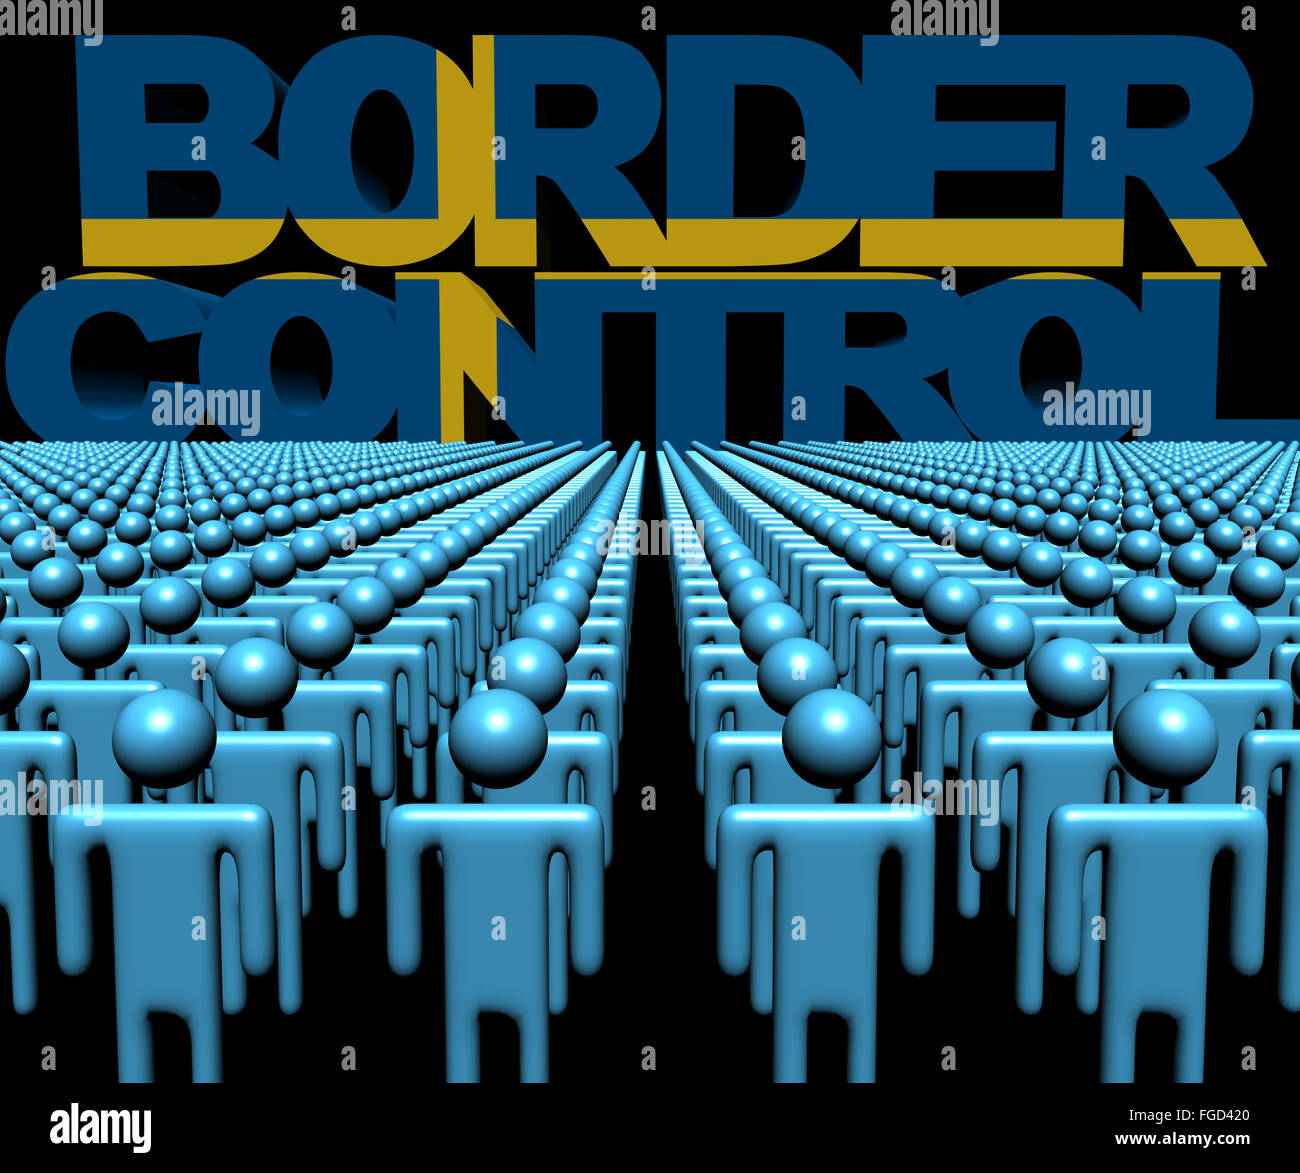 Border Control text with Swedish flag and crowd of people illustration Stock Photo